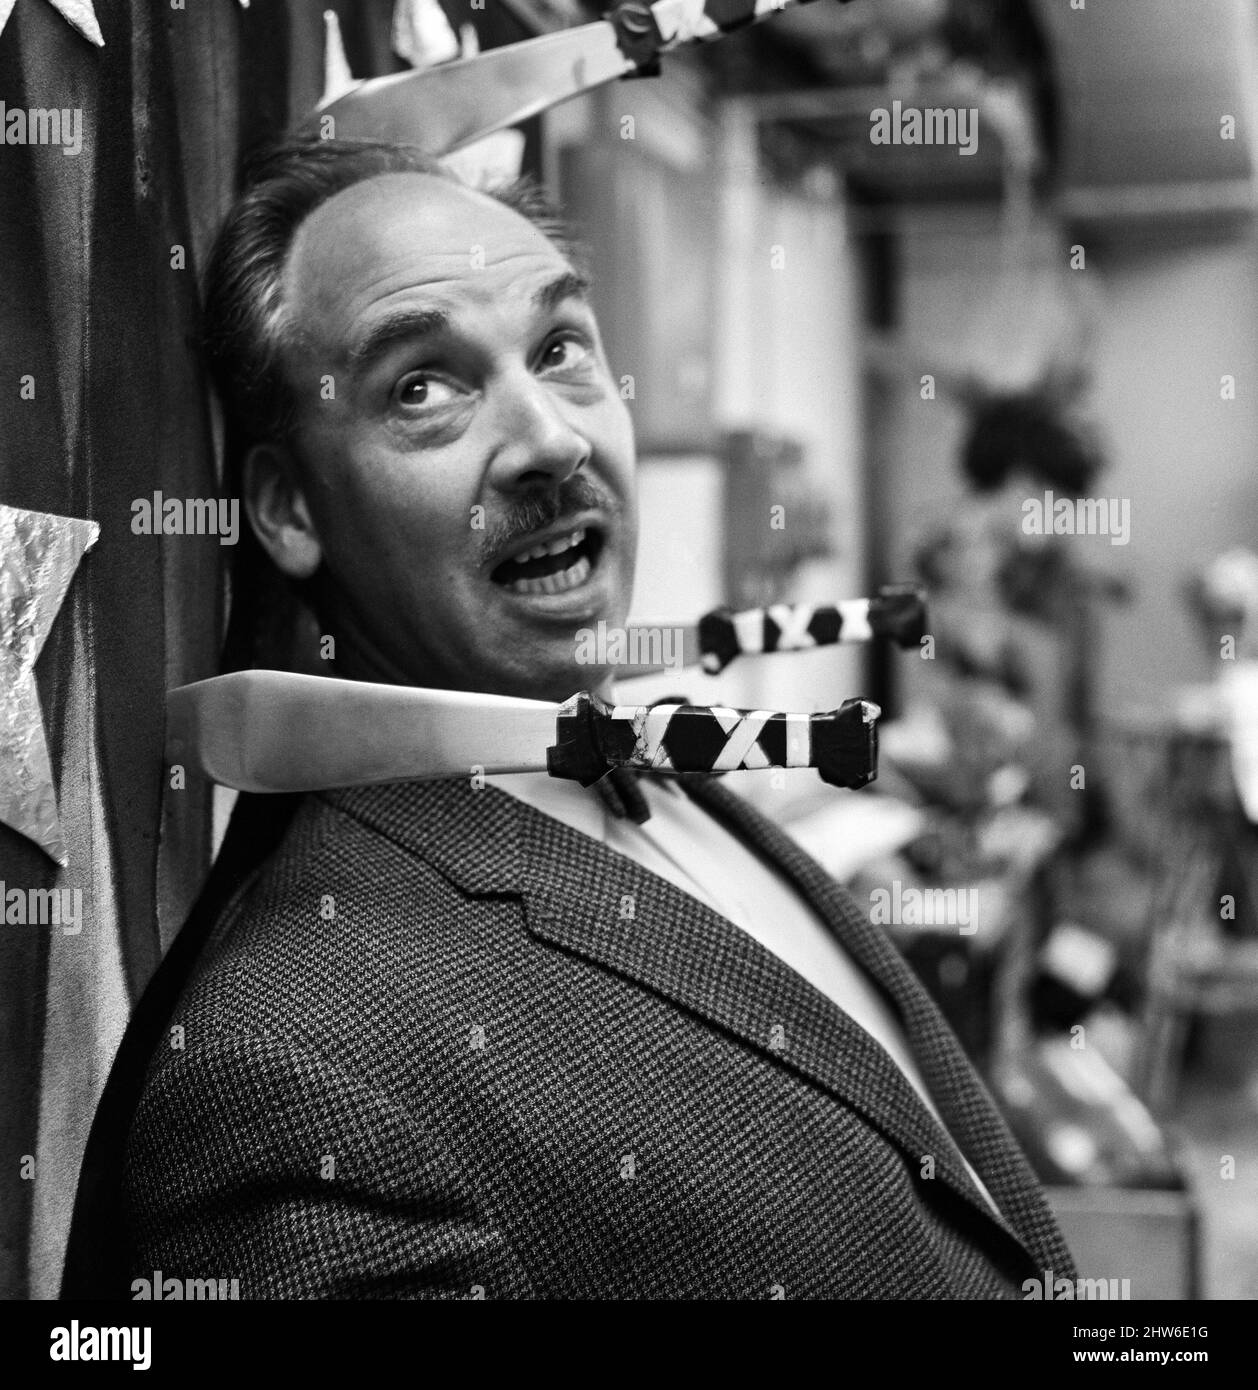 Bernard Wilkie, Senior Designer at the Special Effects Department at BBC television Centre, tries out one of his department's special effects made for a knife throwing routine. 16th May 1968. Stock Photo